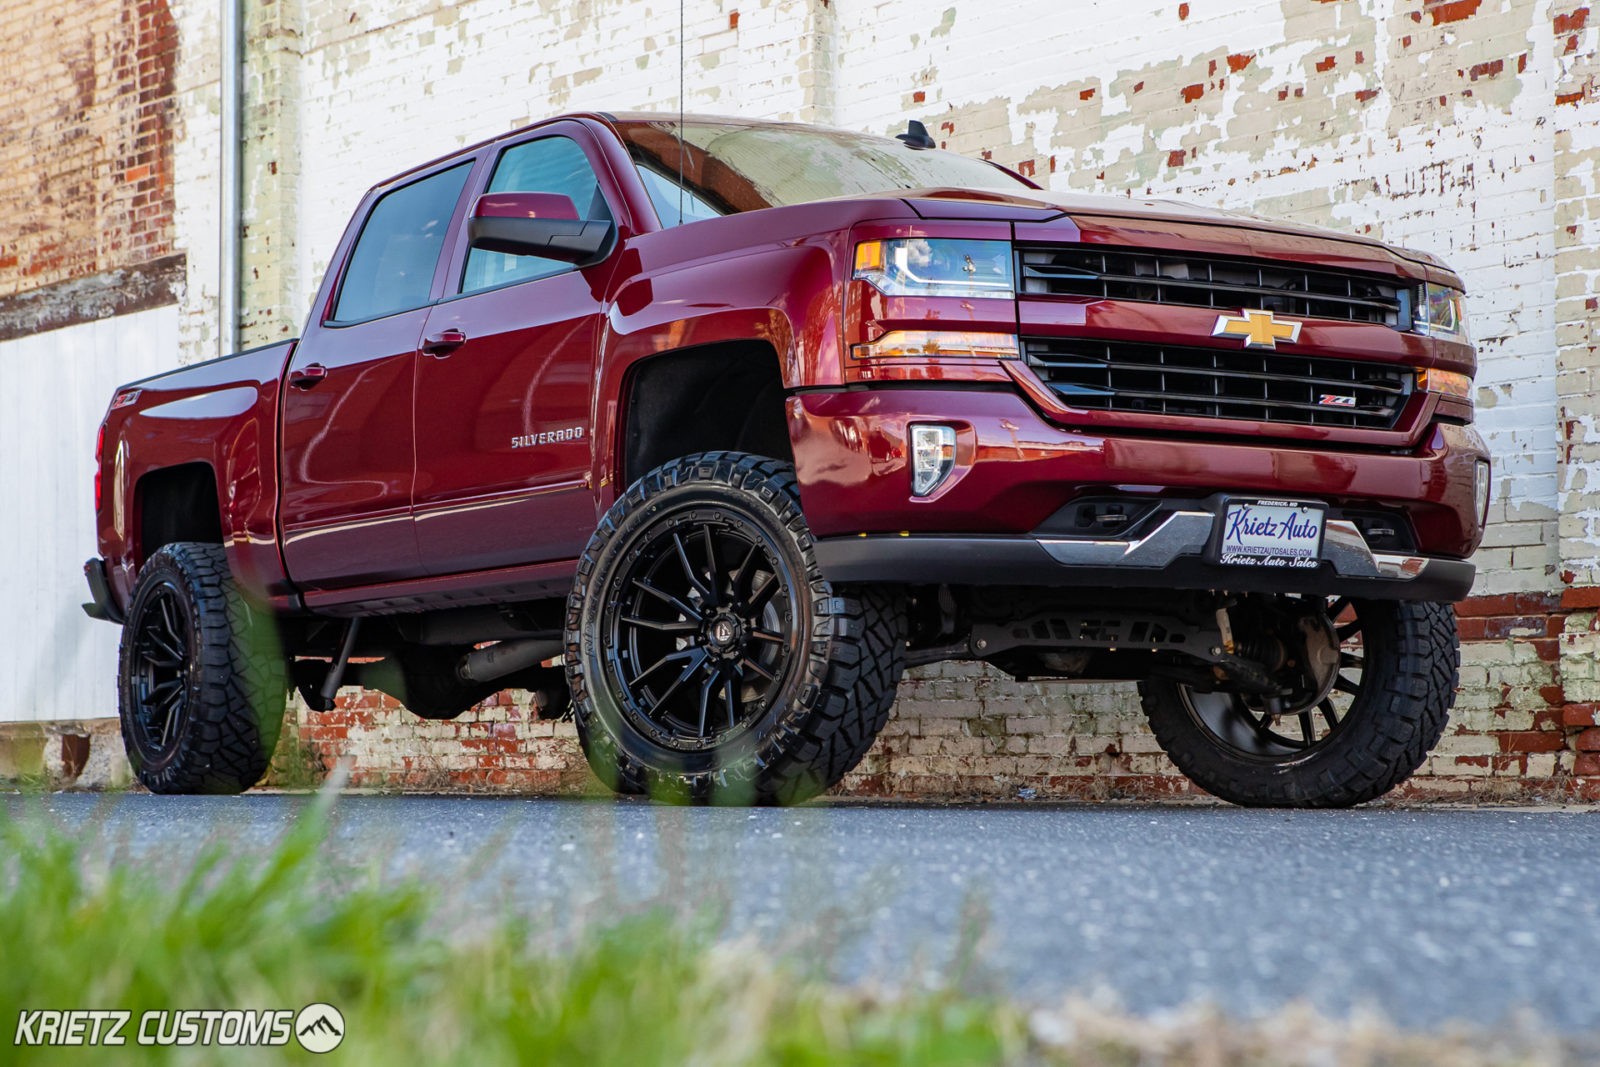 Lifted 2017 Chevy Silverado 1500 With 22×10 Fuel Rebel Wheels And 7